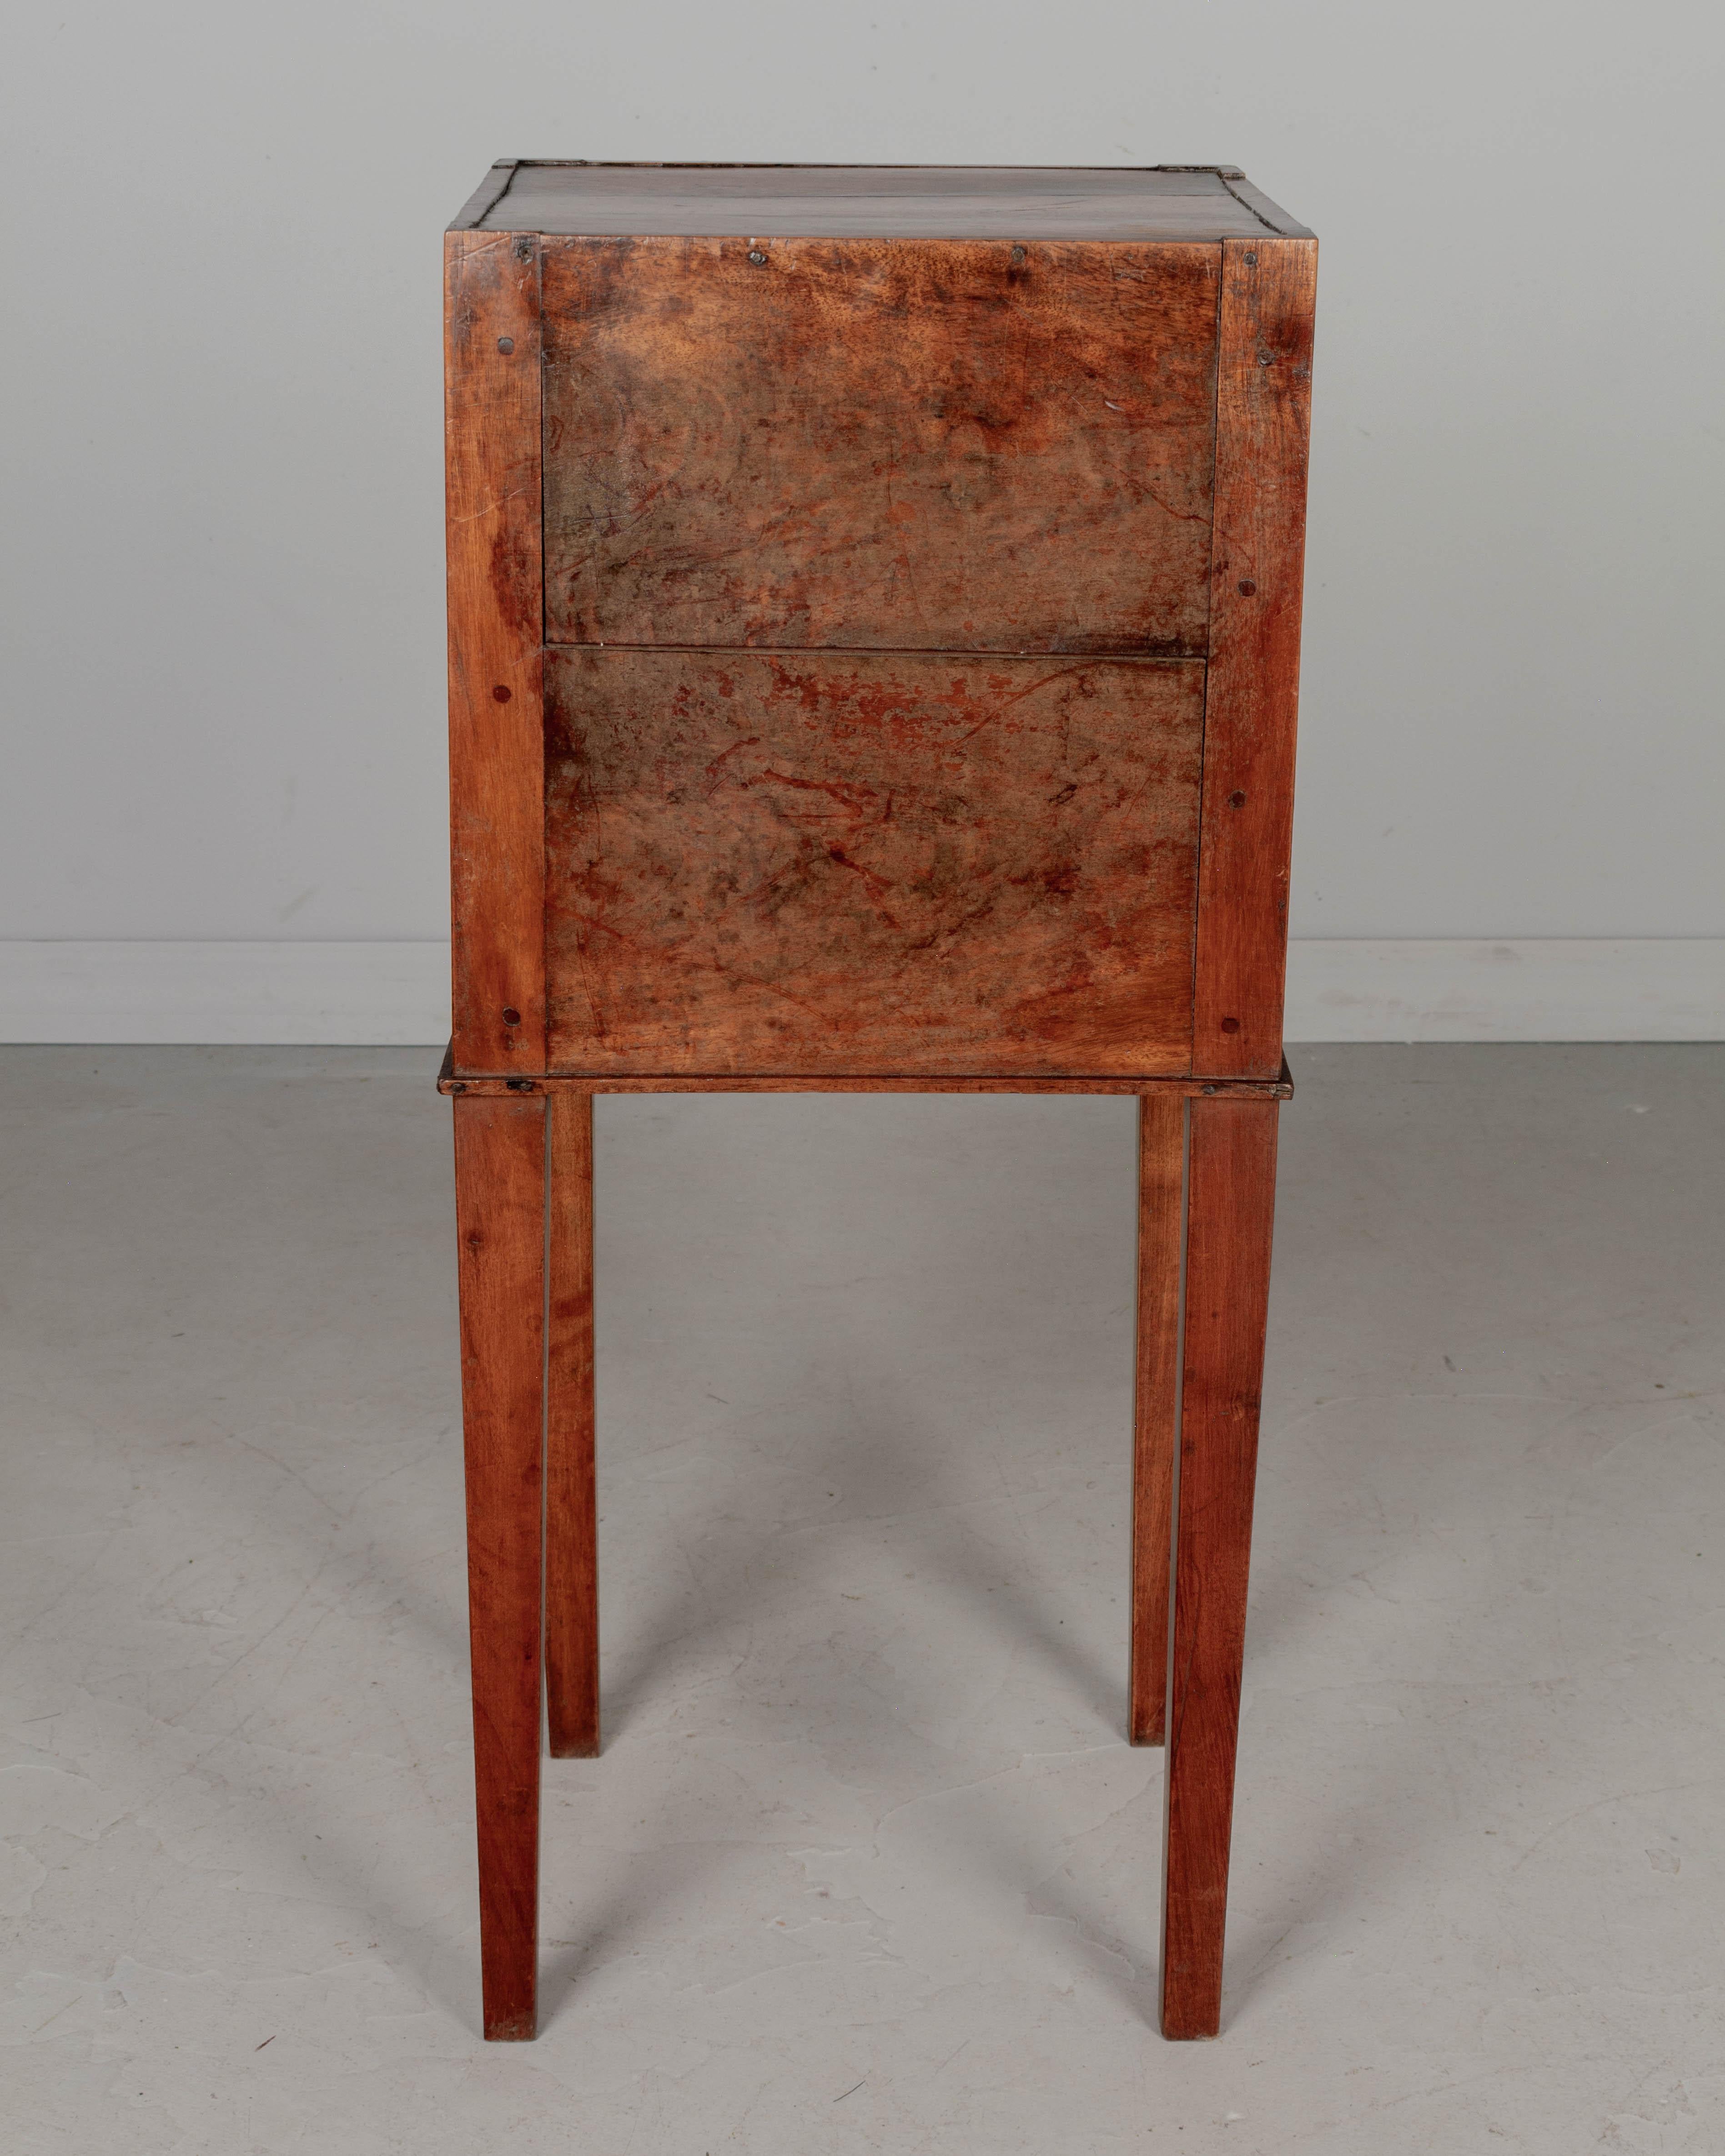 19th Century French Walnut Side Table with Tambour Door In Good Condition For Sale In Winter Park, FL